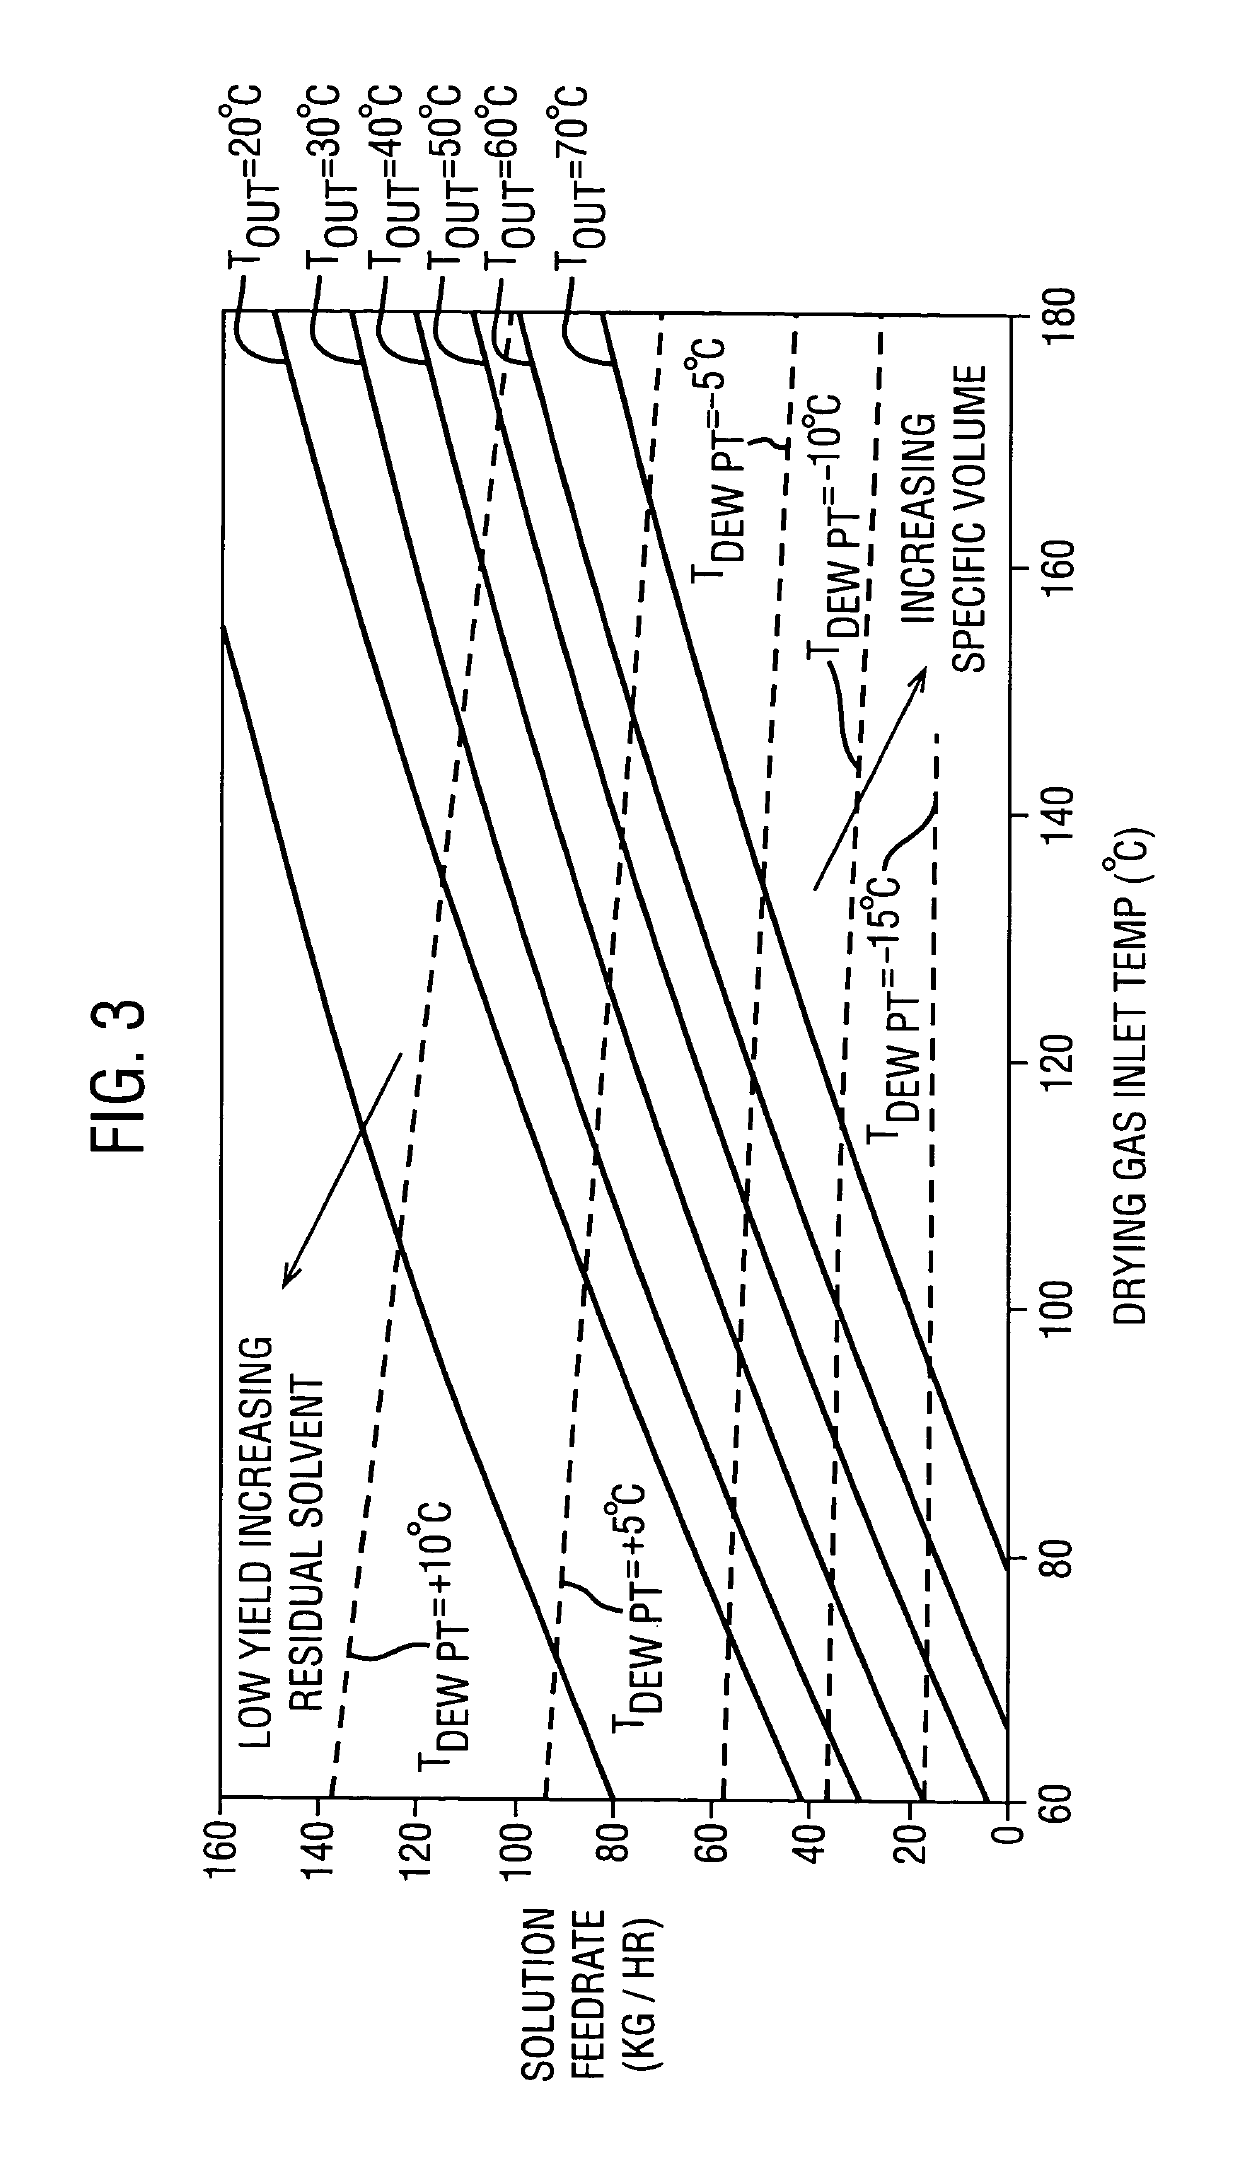 Spray drying processes for forming solid amorphous dispersions of drugs and polymers